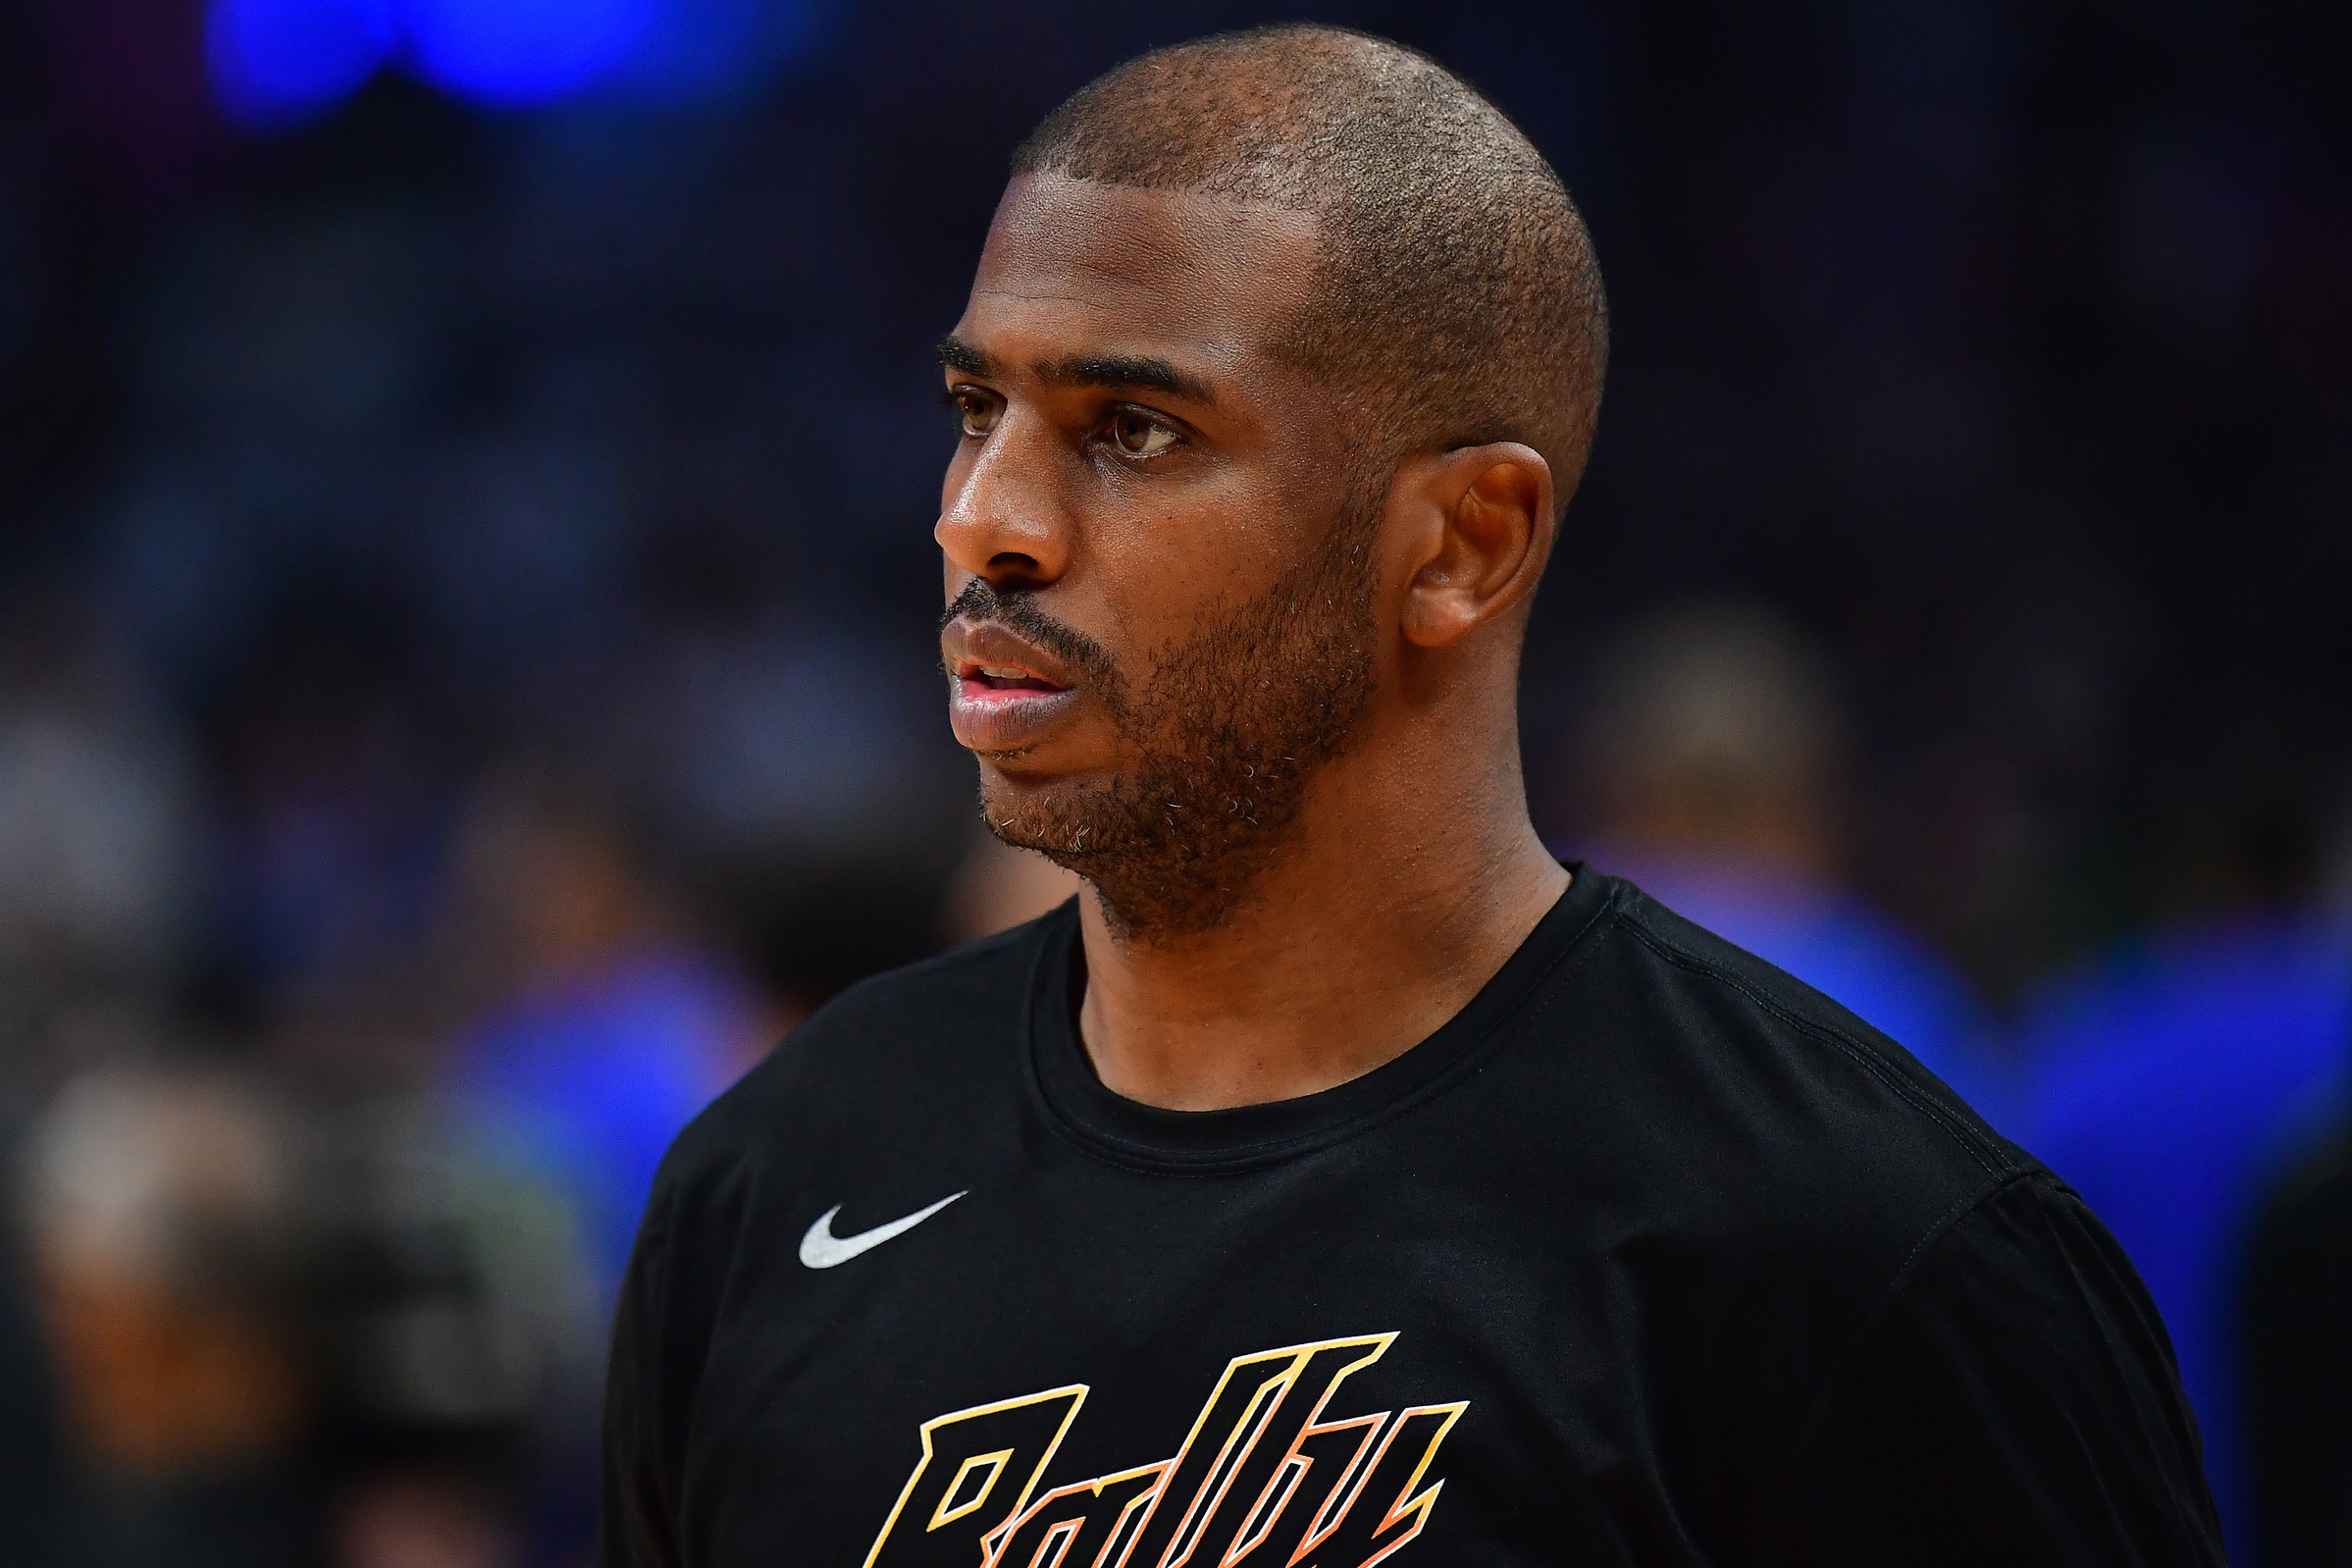 Apr 22, 2023; Los Angeles, California, USA; Phoenix Suns guard Chris Paul (3) before playing against the Los Angeles Clippers in game four of the 2023 NBA playoffs at Crypto.com Arena. Mandatory Credit: Gary A. Vasquez-USA TODAY Sports